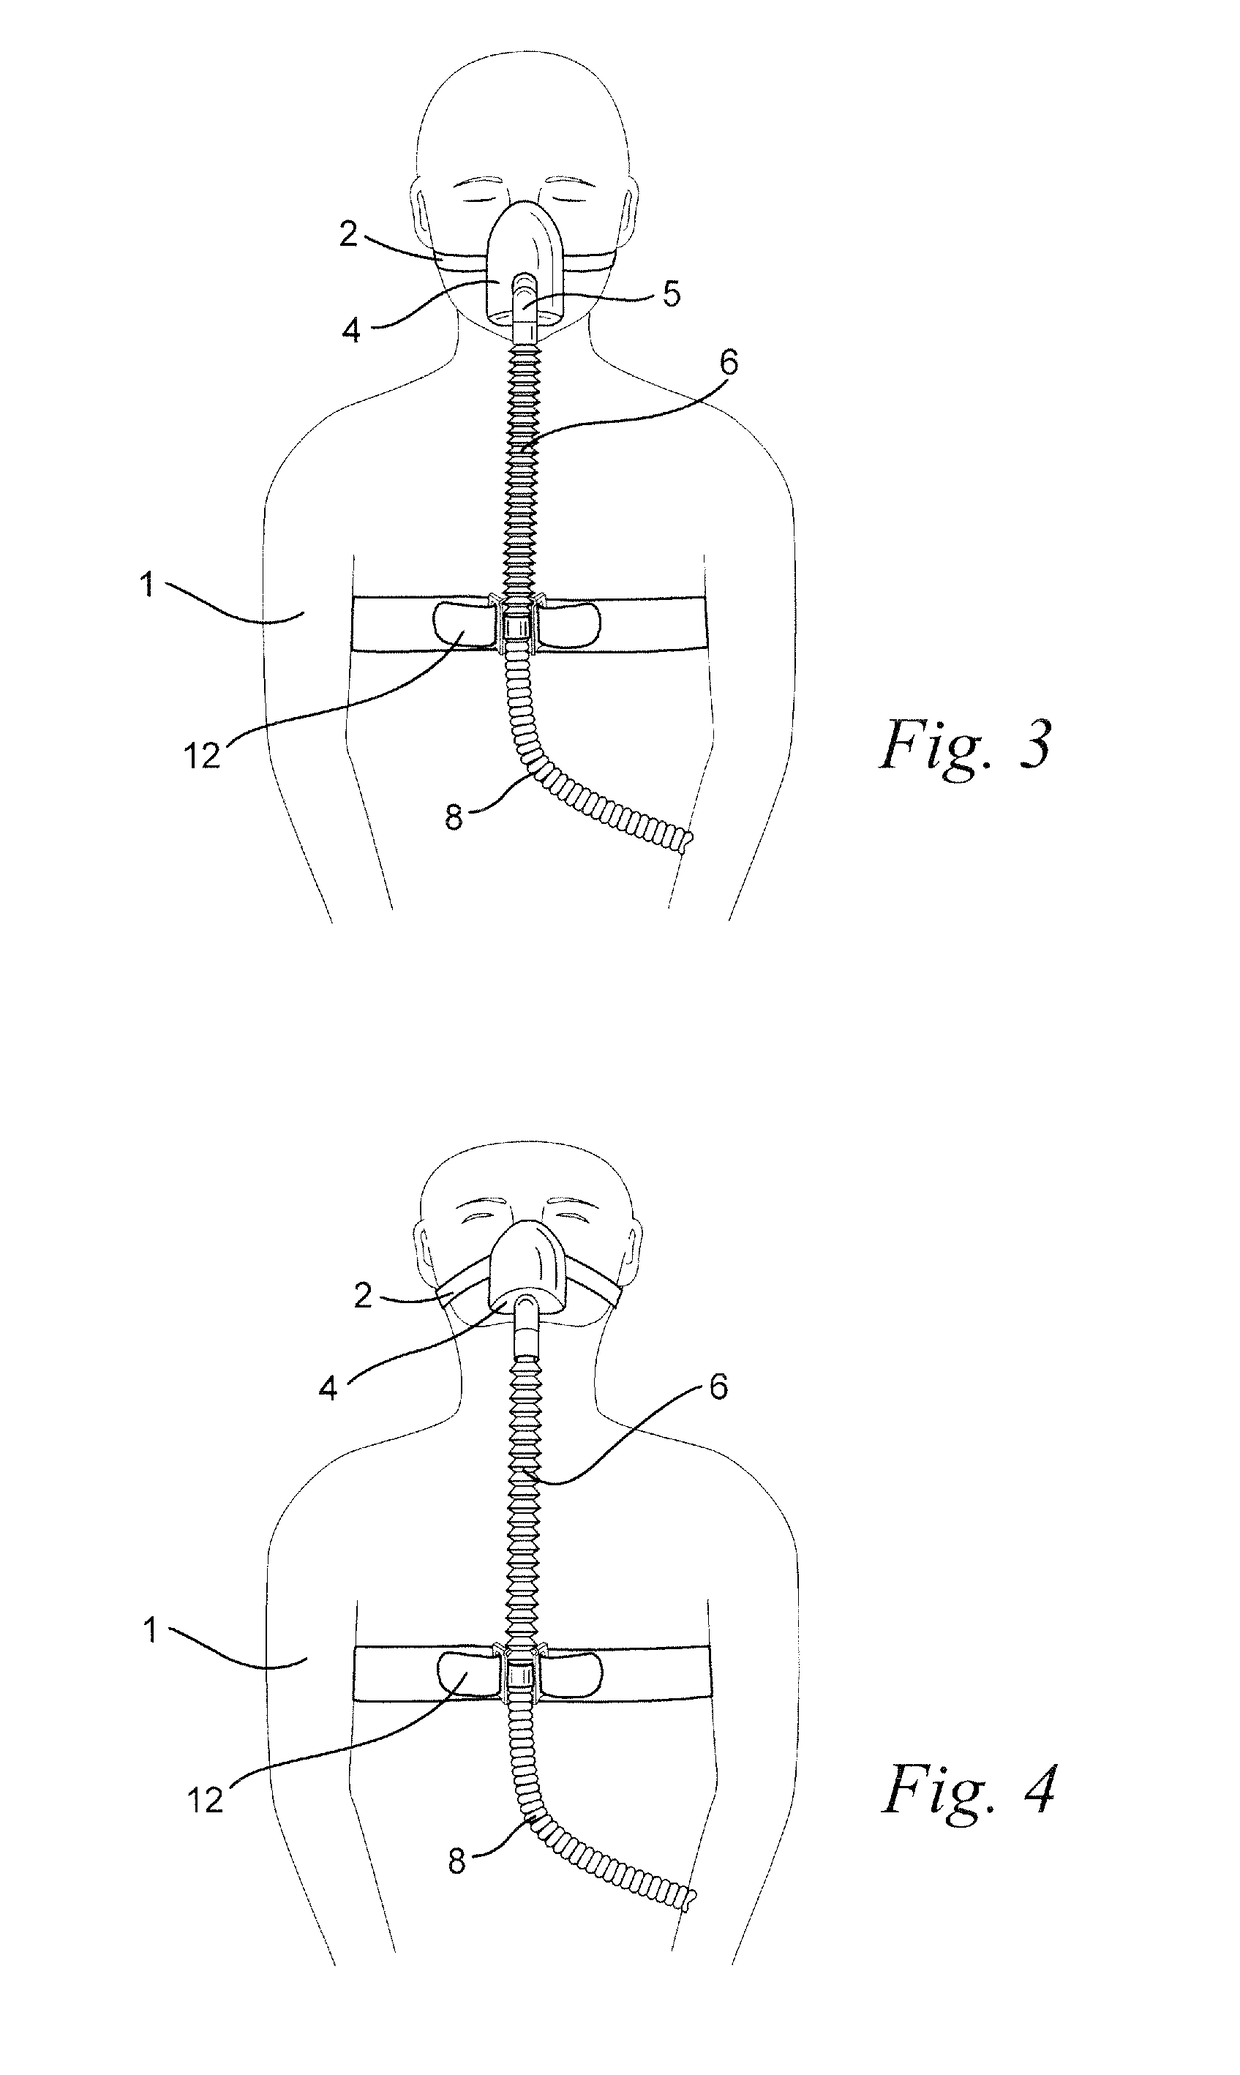 Retractable tube for CPAP